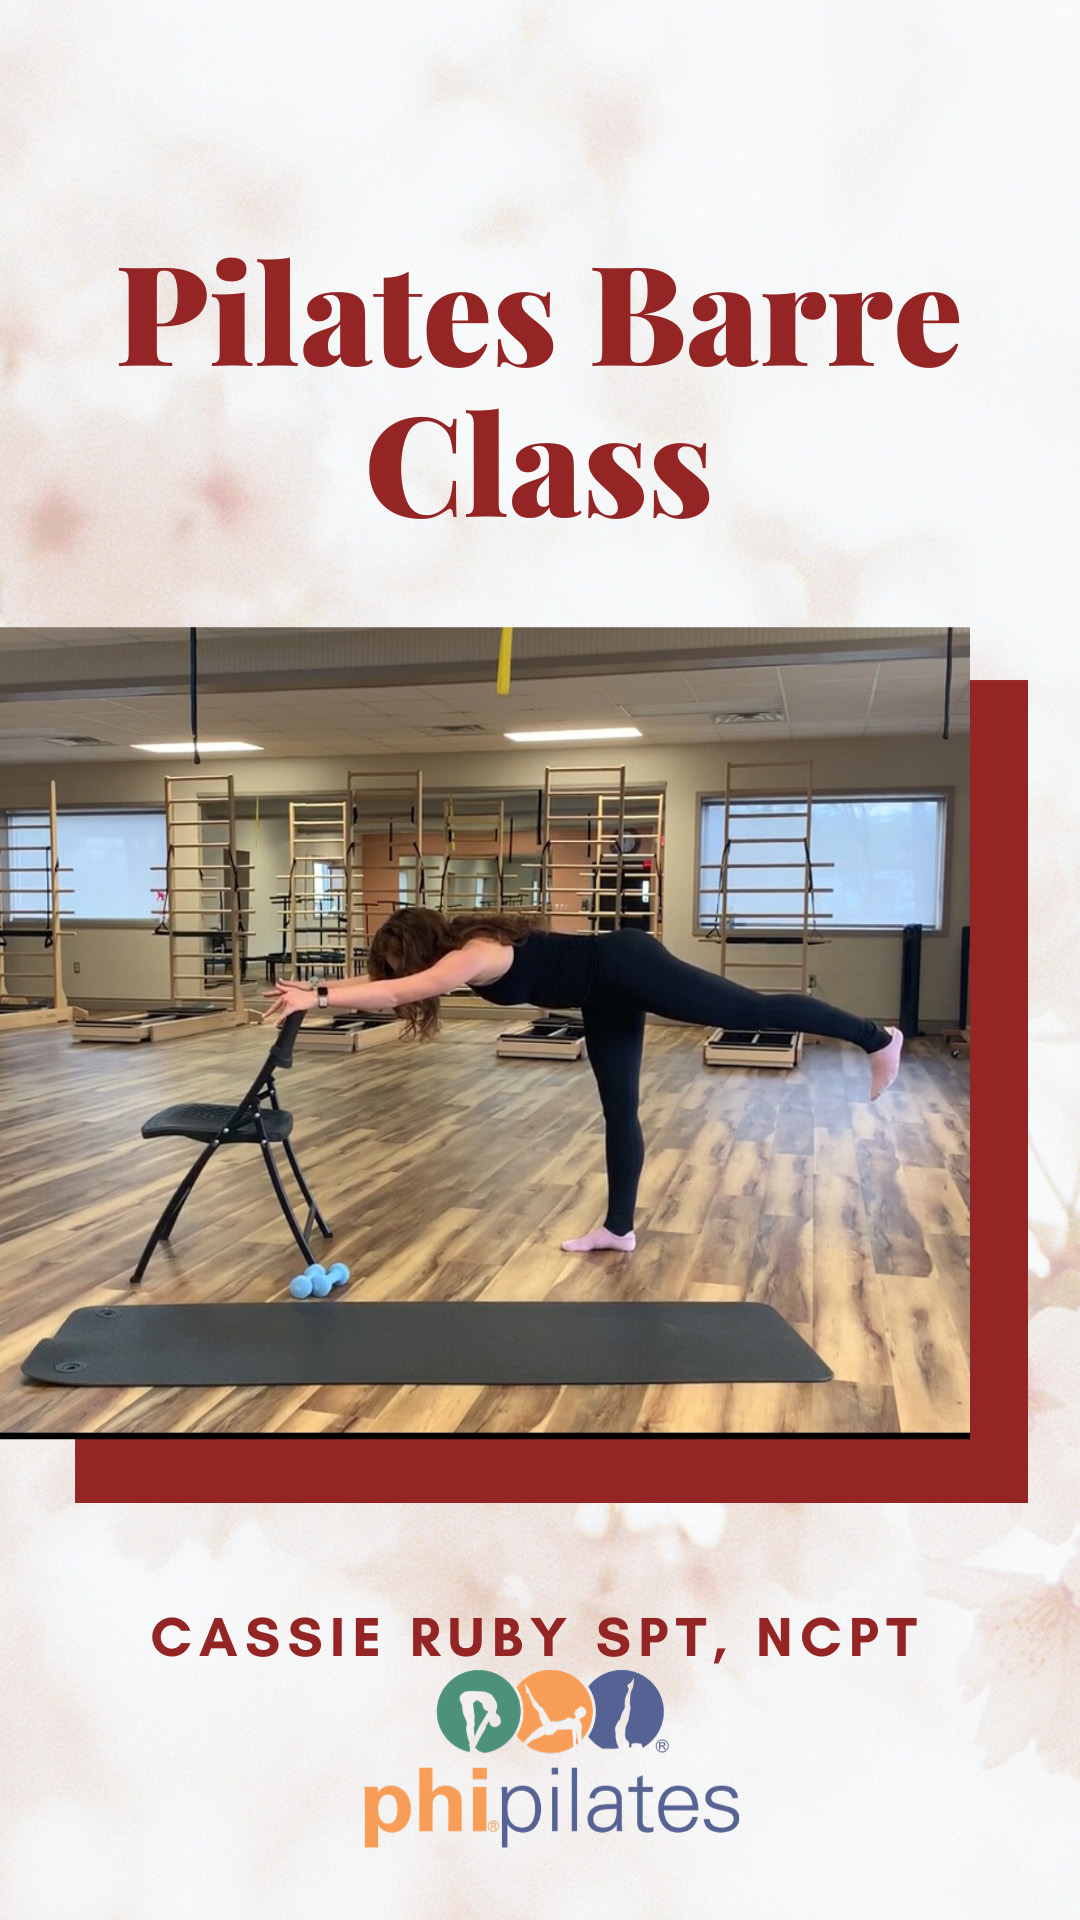 Pilates Barre Workout with Cassie Ruby SPT, NCPT